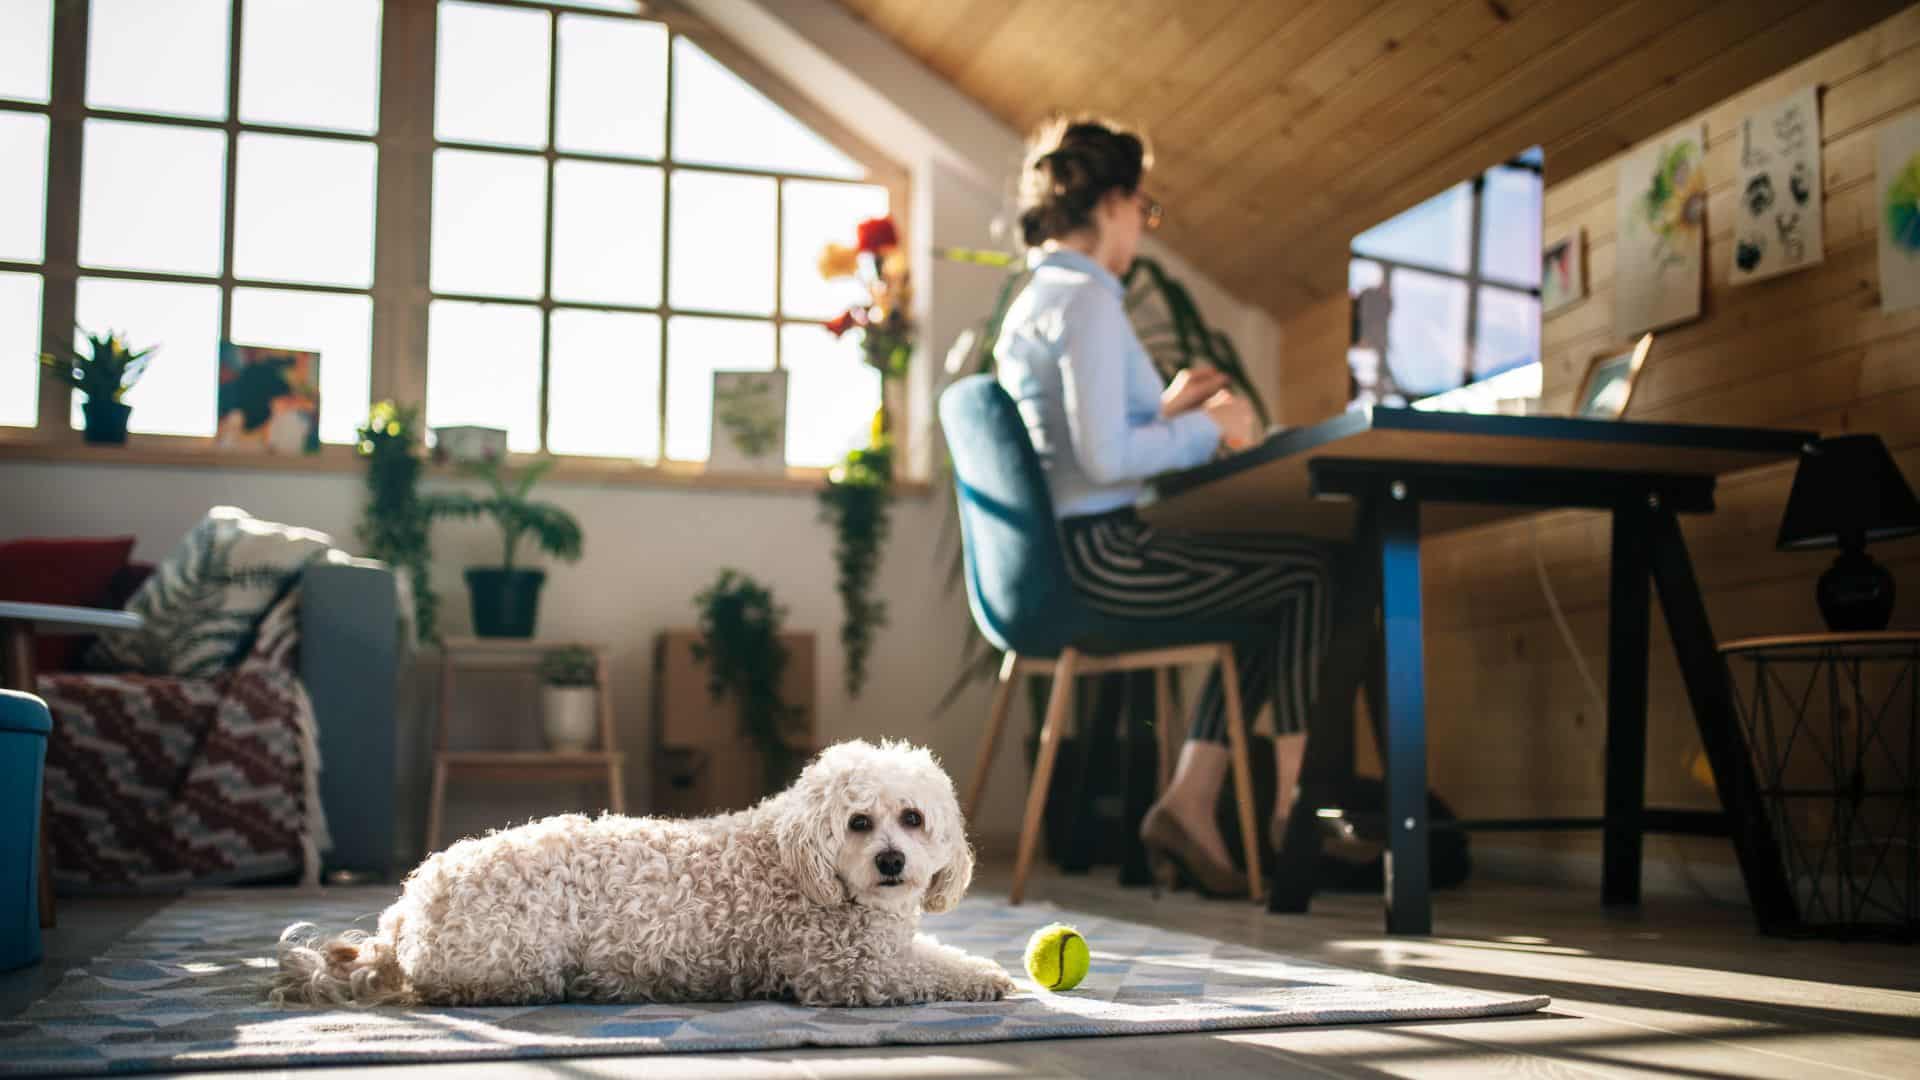 How to Promote and Grow Your Pet Business Online: In the background a woman sits are her desk working on her pet business, in the foreground her small bichon frise is lying next to her.